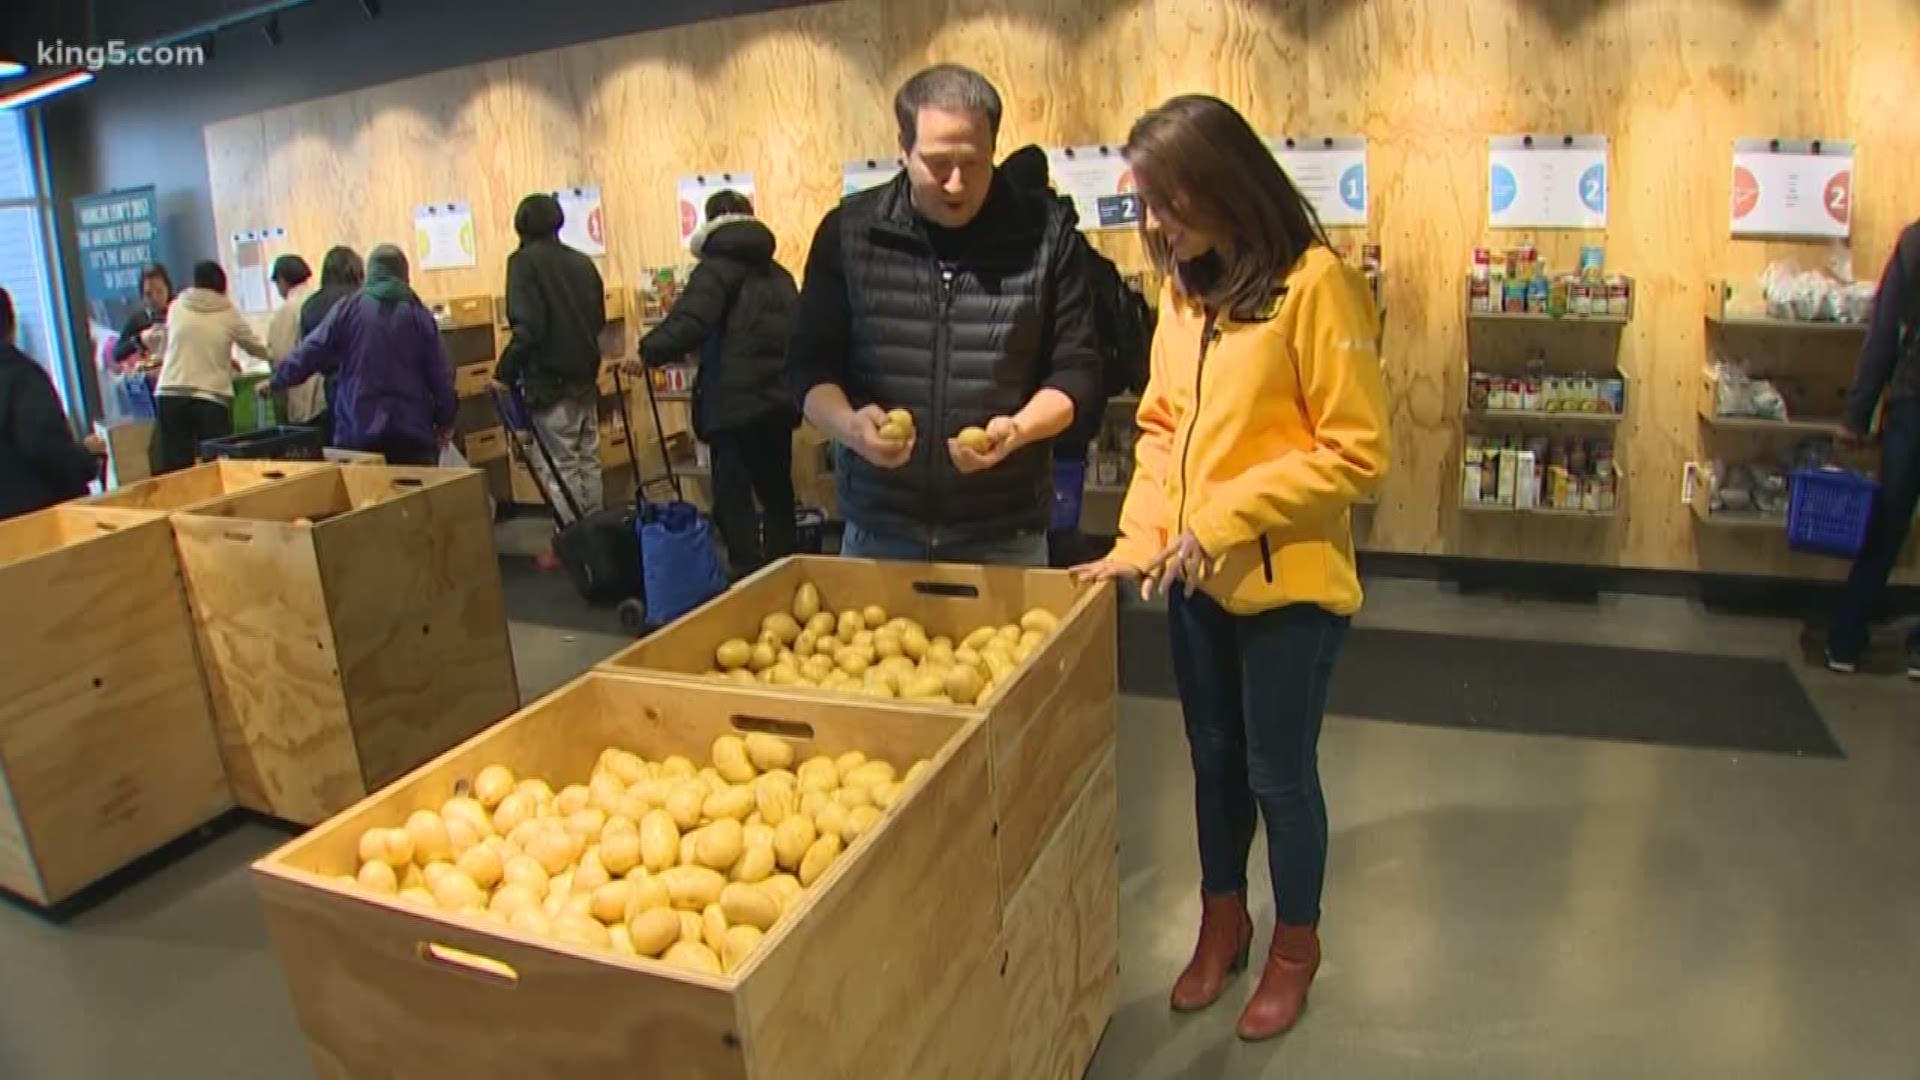 A new grocery store south of Downtown Seattle is restocking produce and dignity. The SODO Community Market aims to change the stigma associated with food banks.